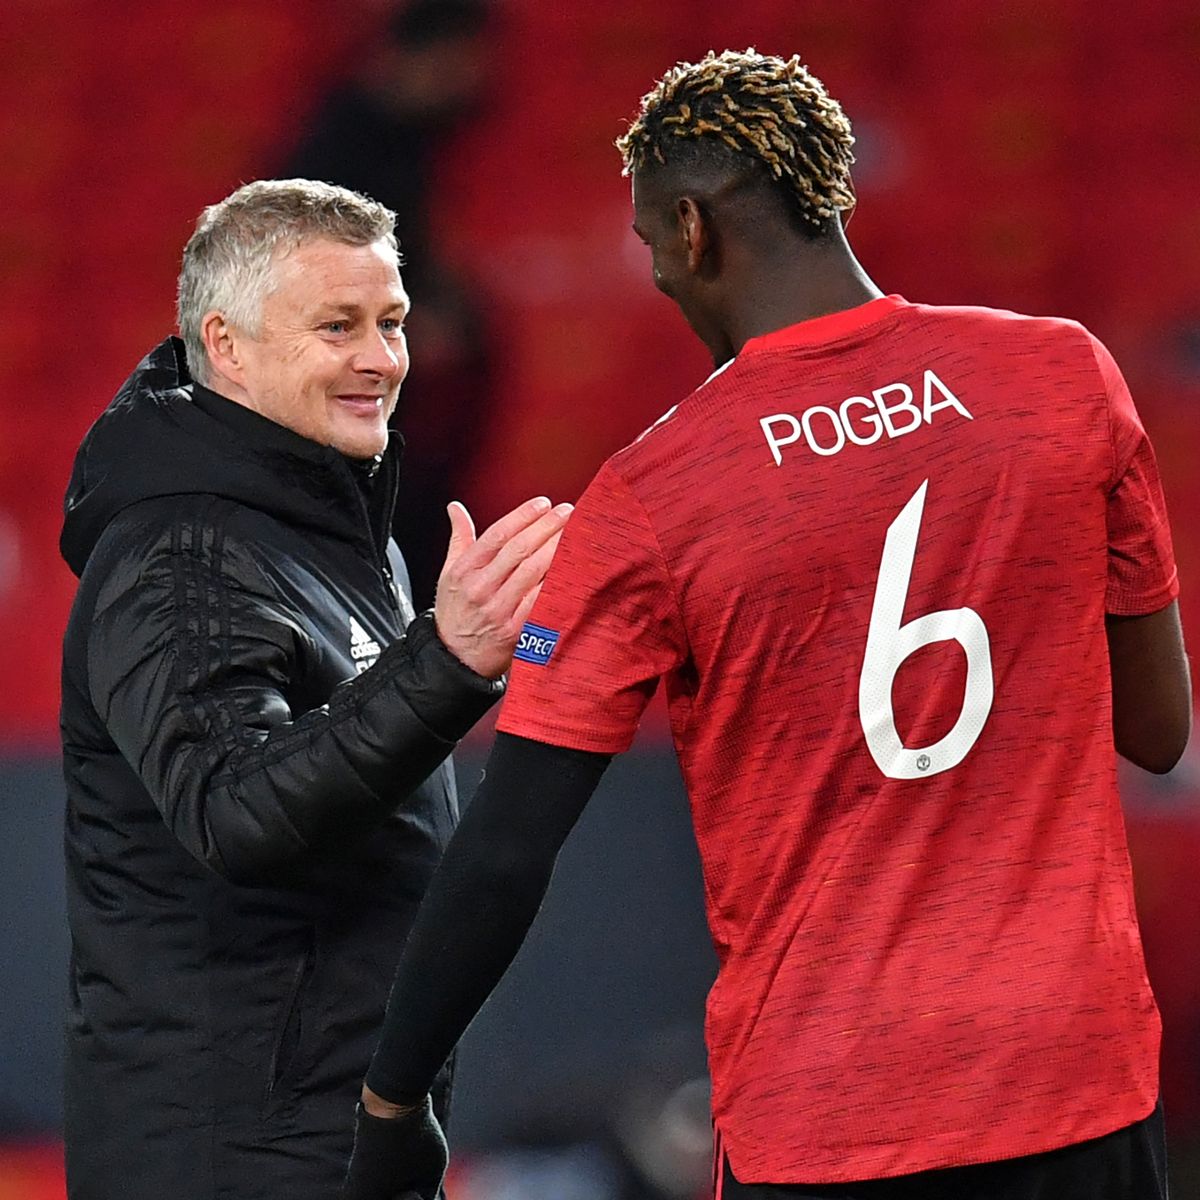 Paul Pogba Denies False Reports About Him and Solskjaer